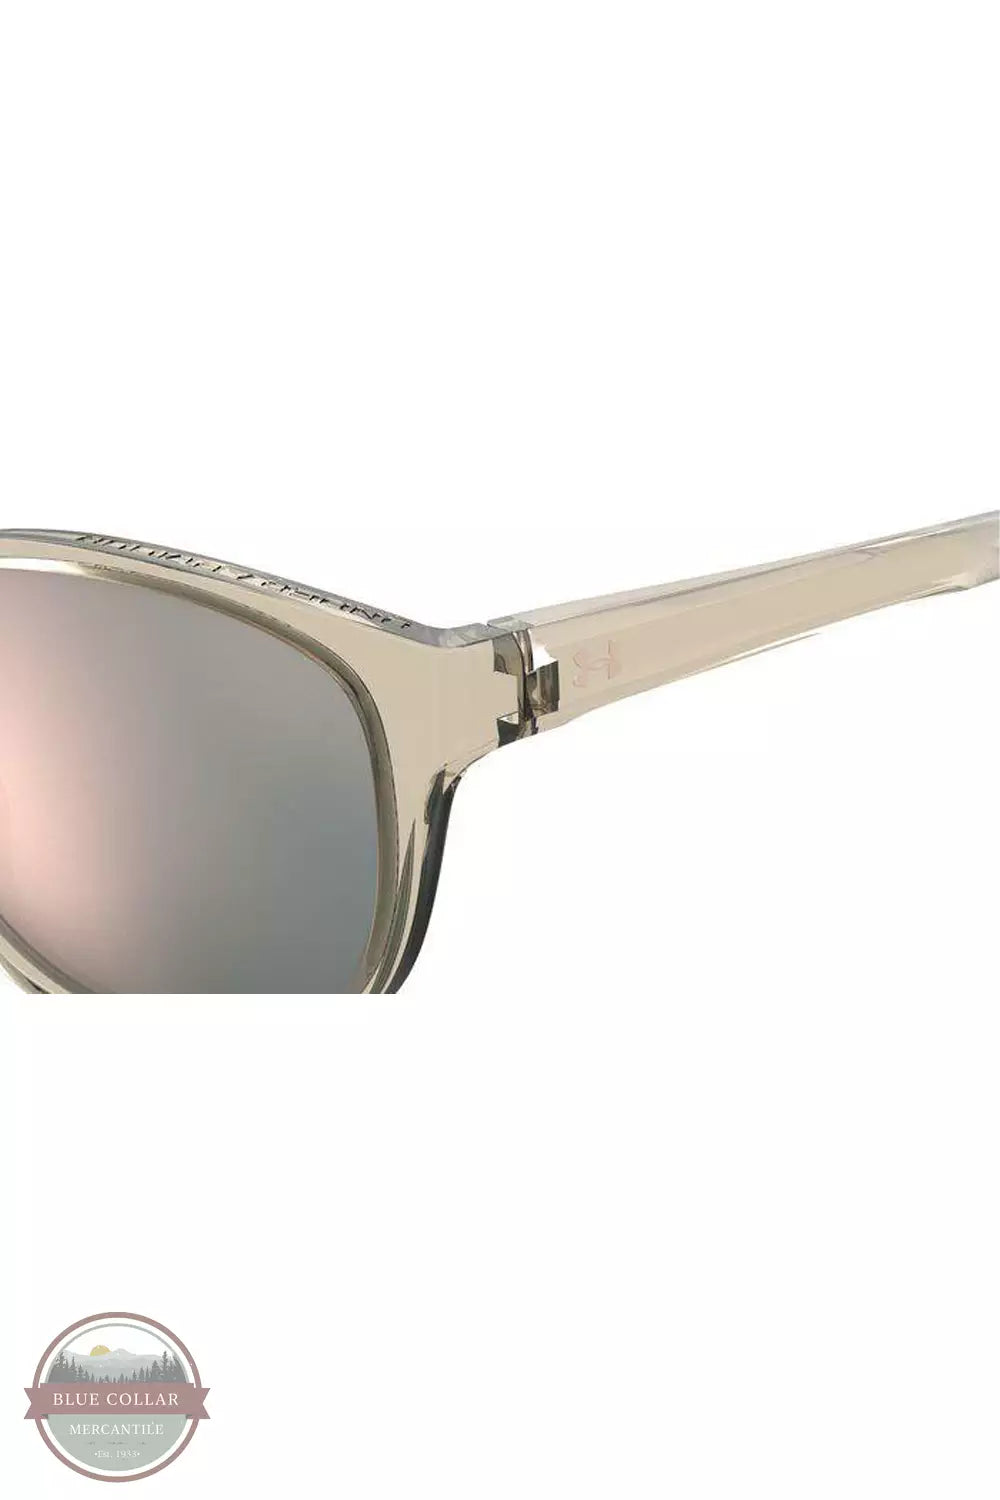 Under Armour 1369314-233 Breathe Sunglasses in Gray / Rose Gold Detail View